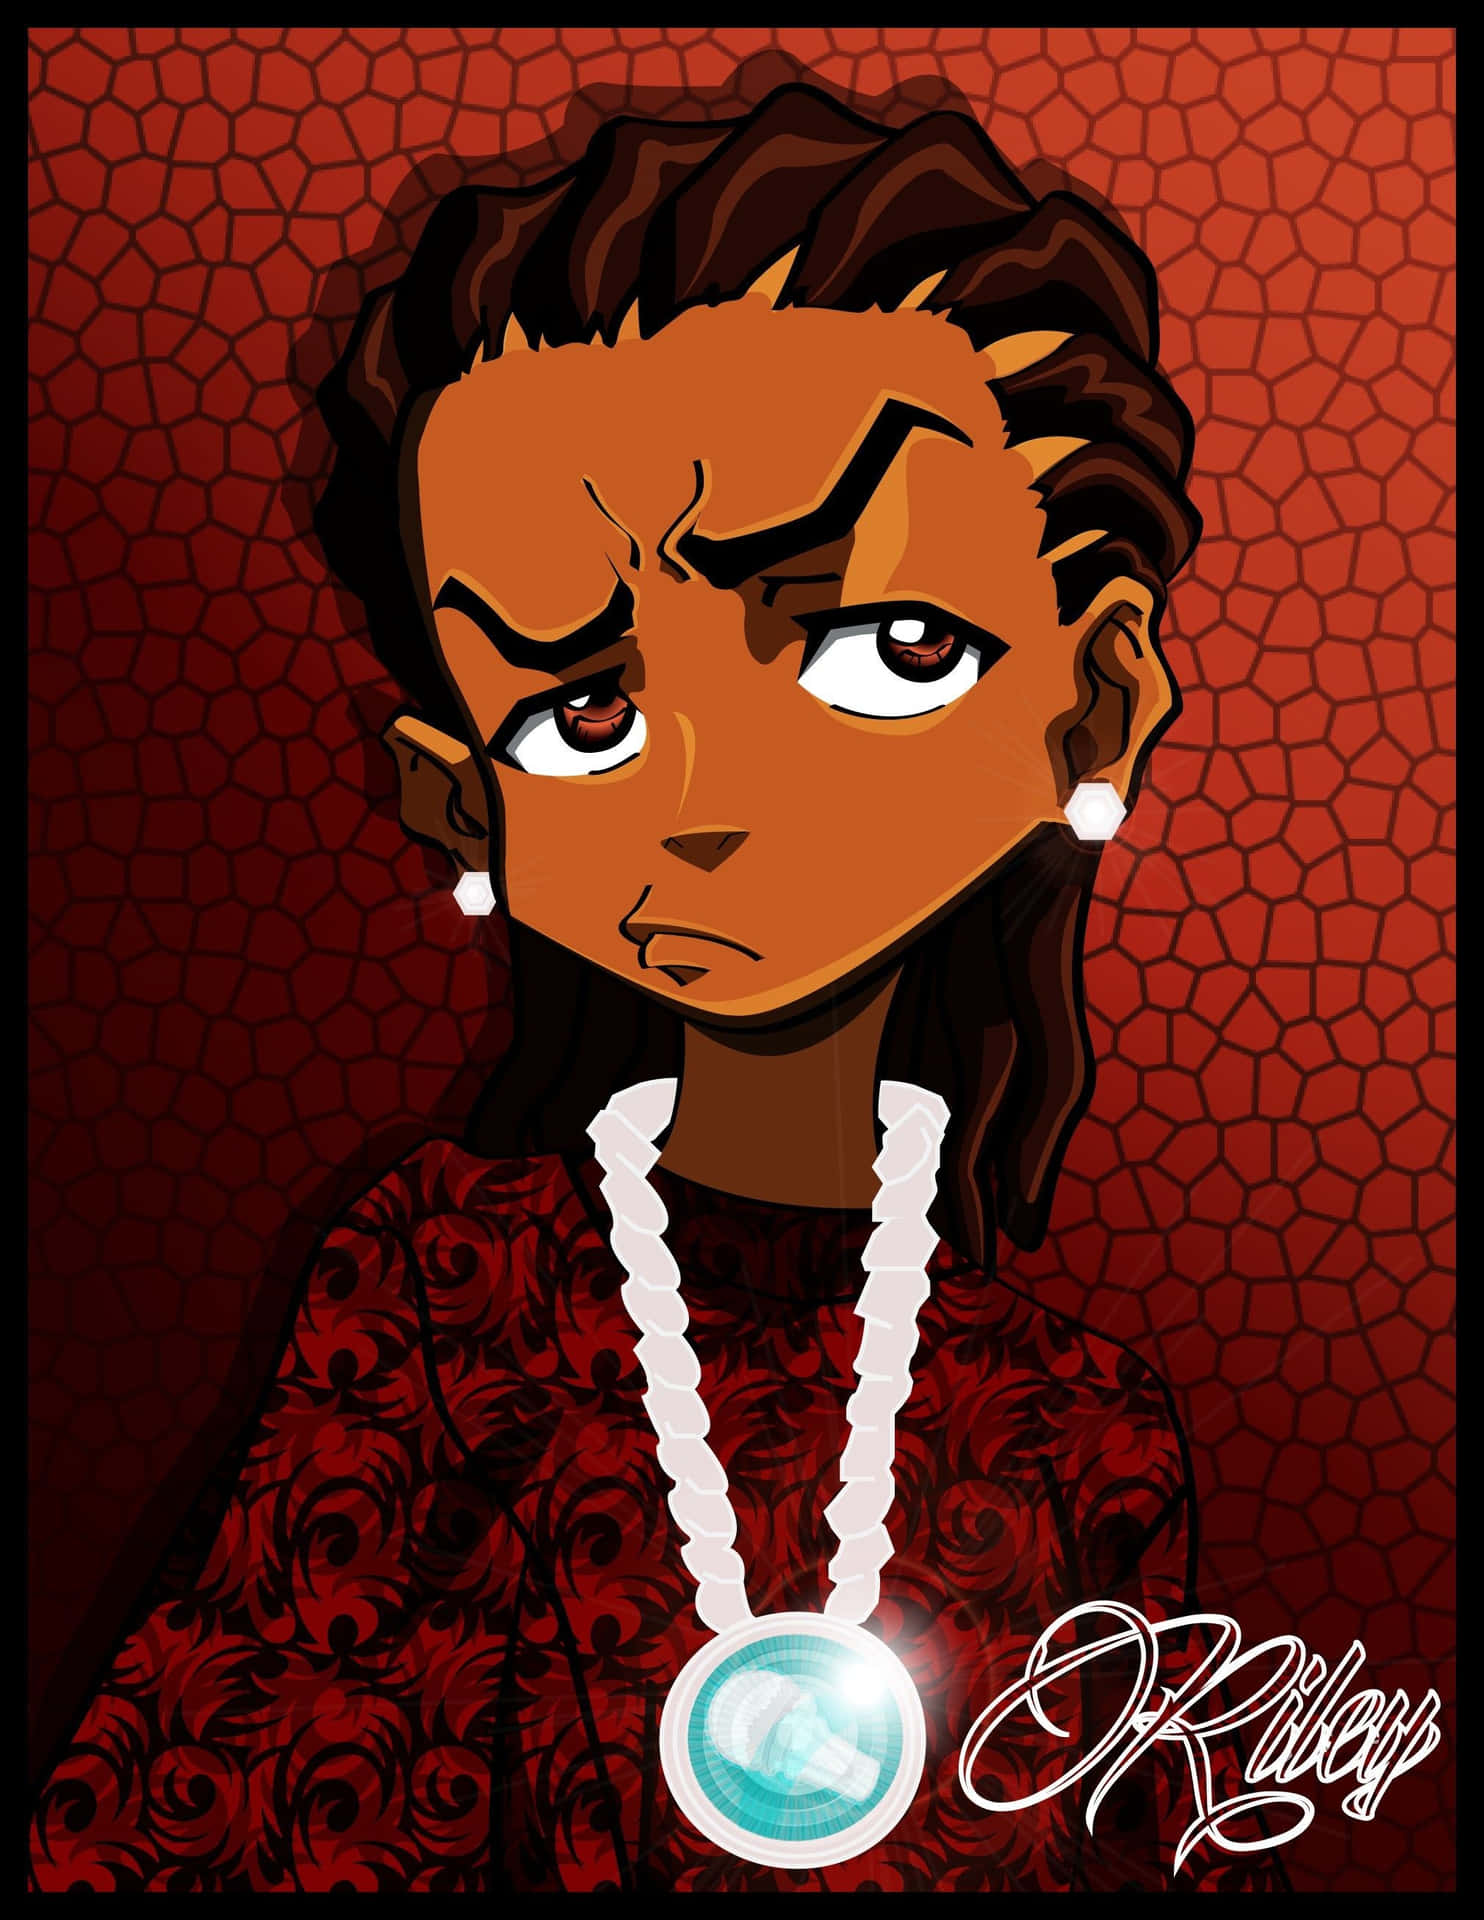 A Cartoon Image Of A Black Man With A Necklace Wallpaper